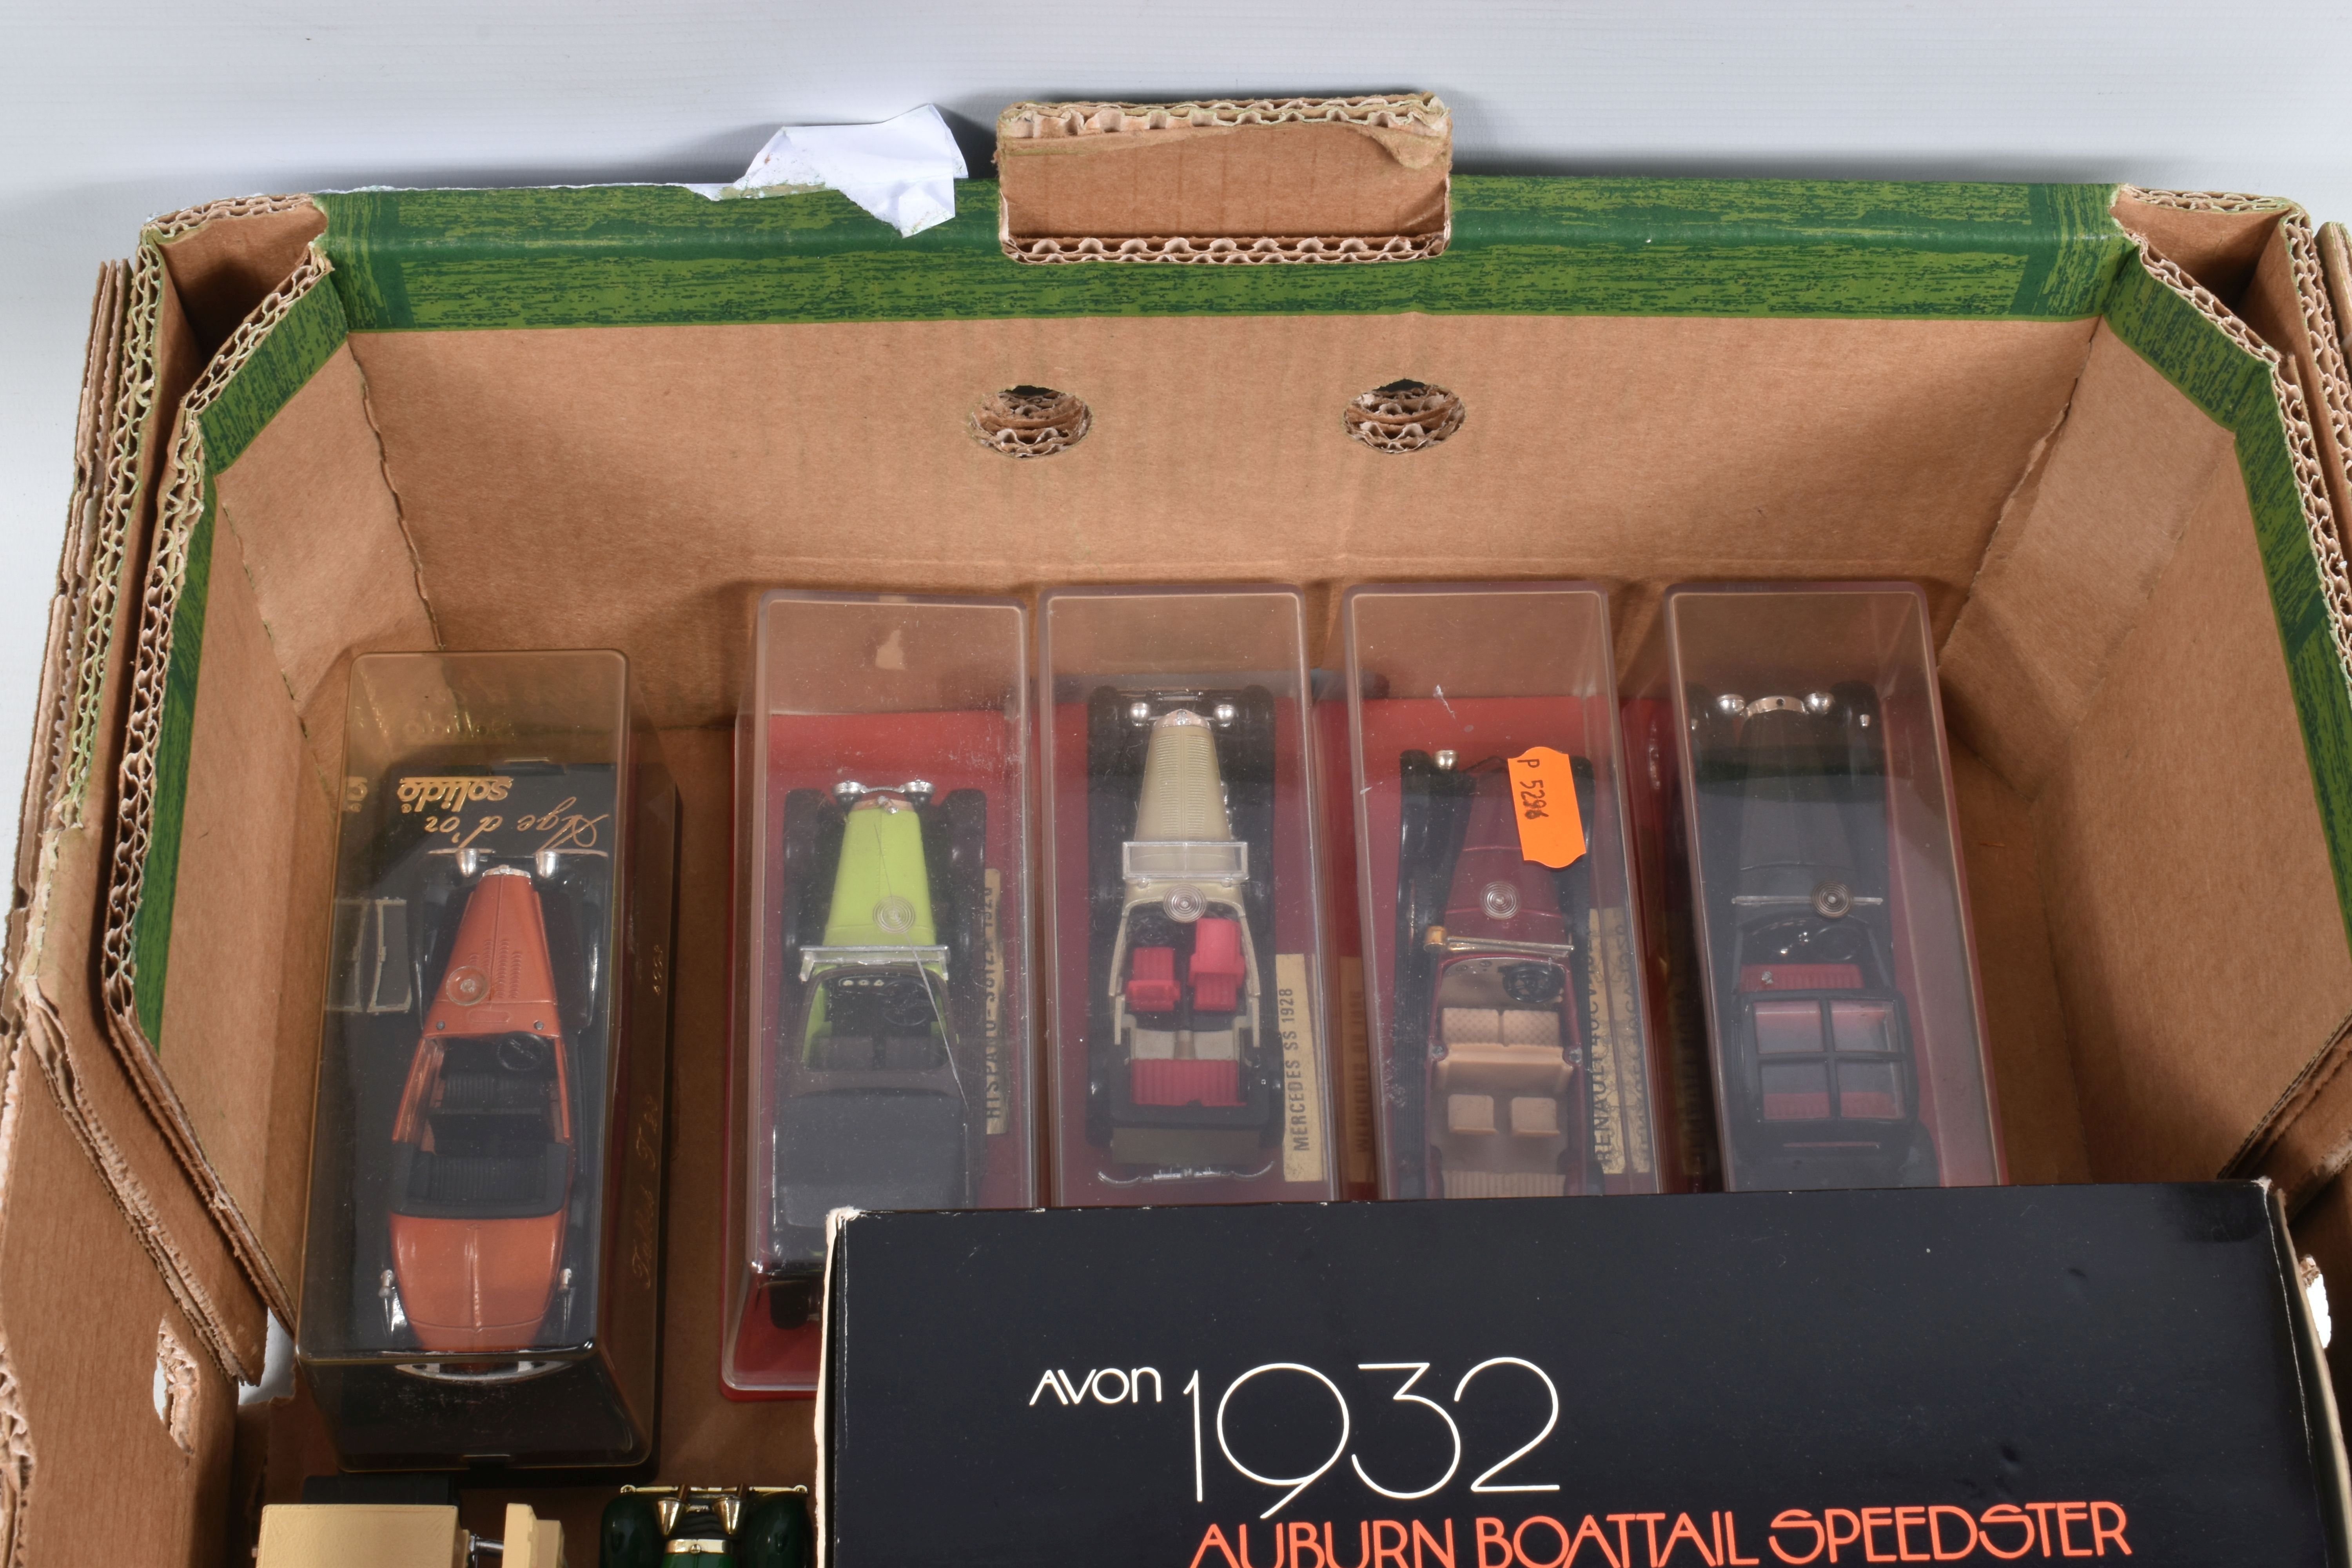 THREE BOXES OF BOXED AND UNBOXED MODEL VEHICLES AND AIRCRAFTS, some of the model aircrafts include a - Image 3 of 13